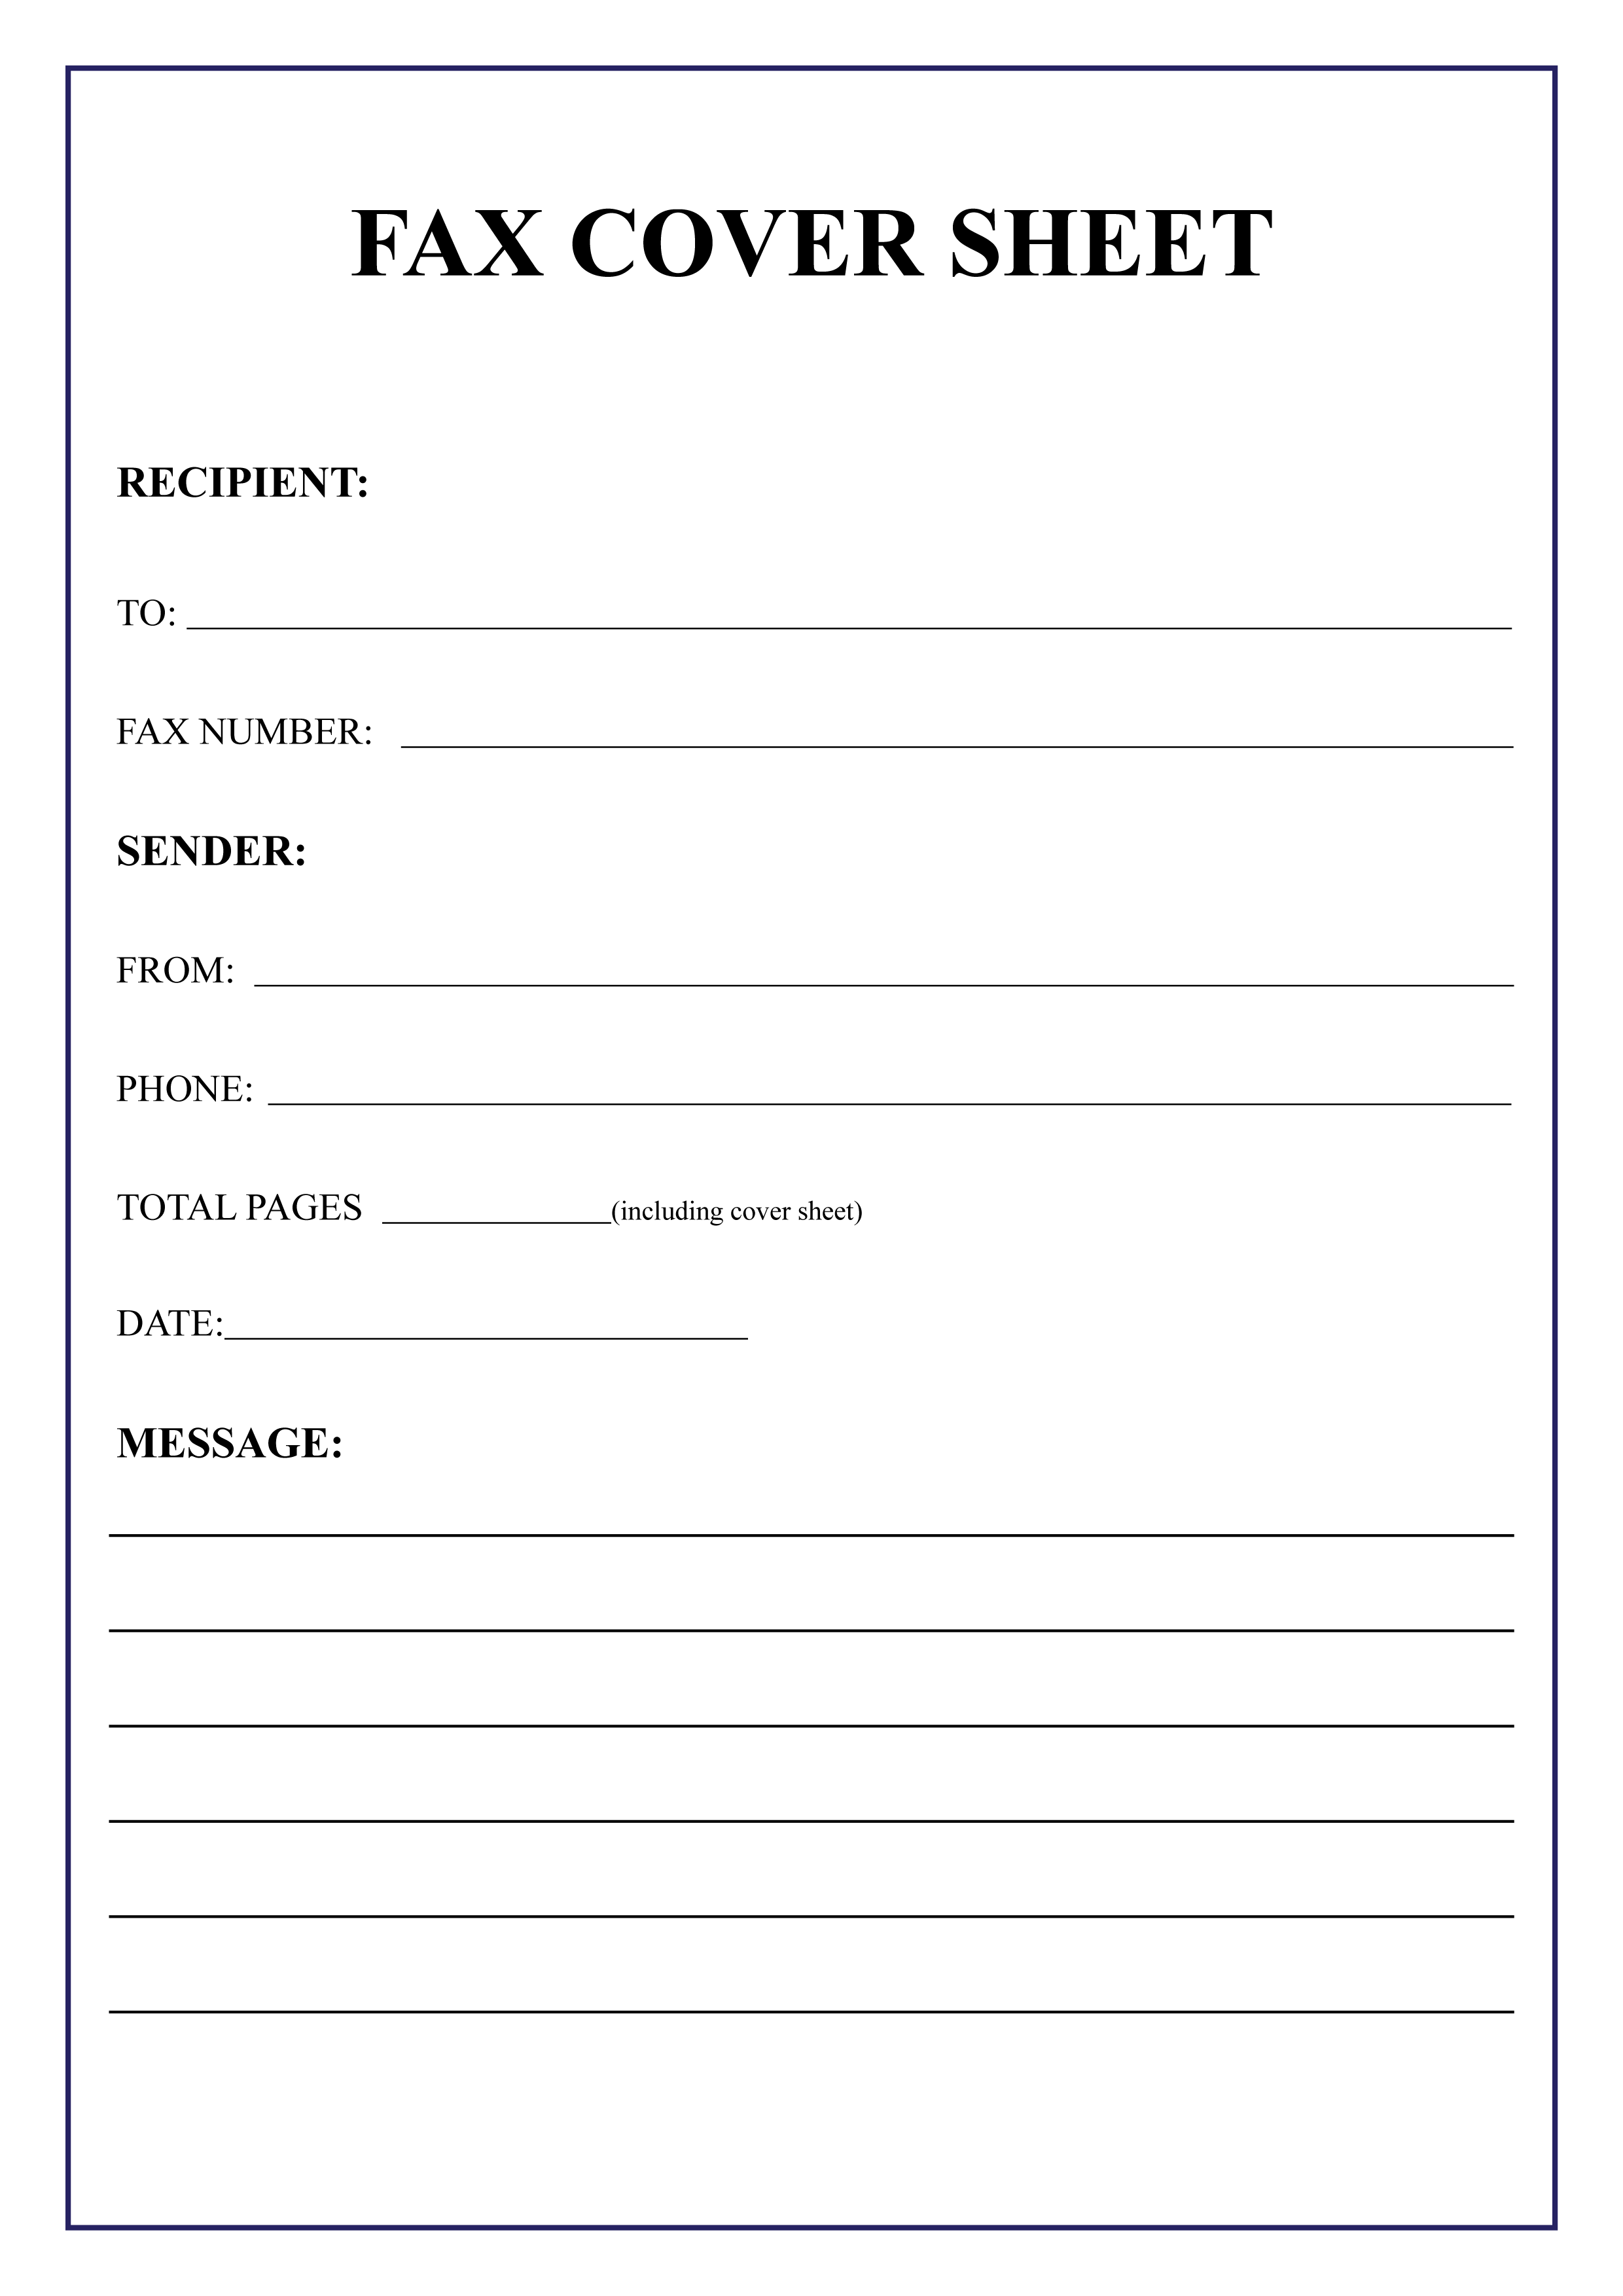 sample-fax-cover-sheet-template-with-examples